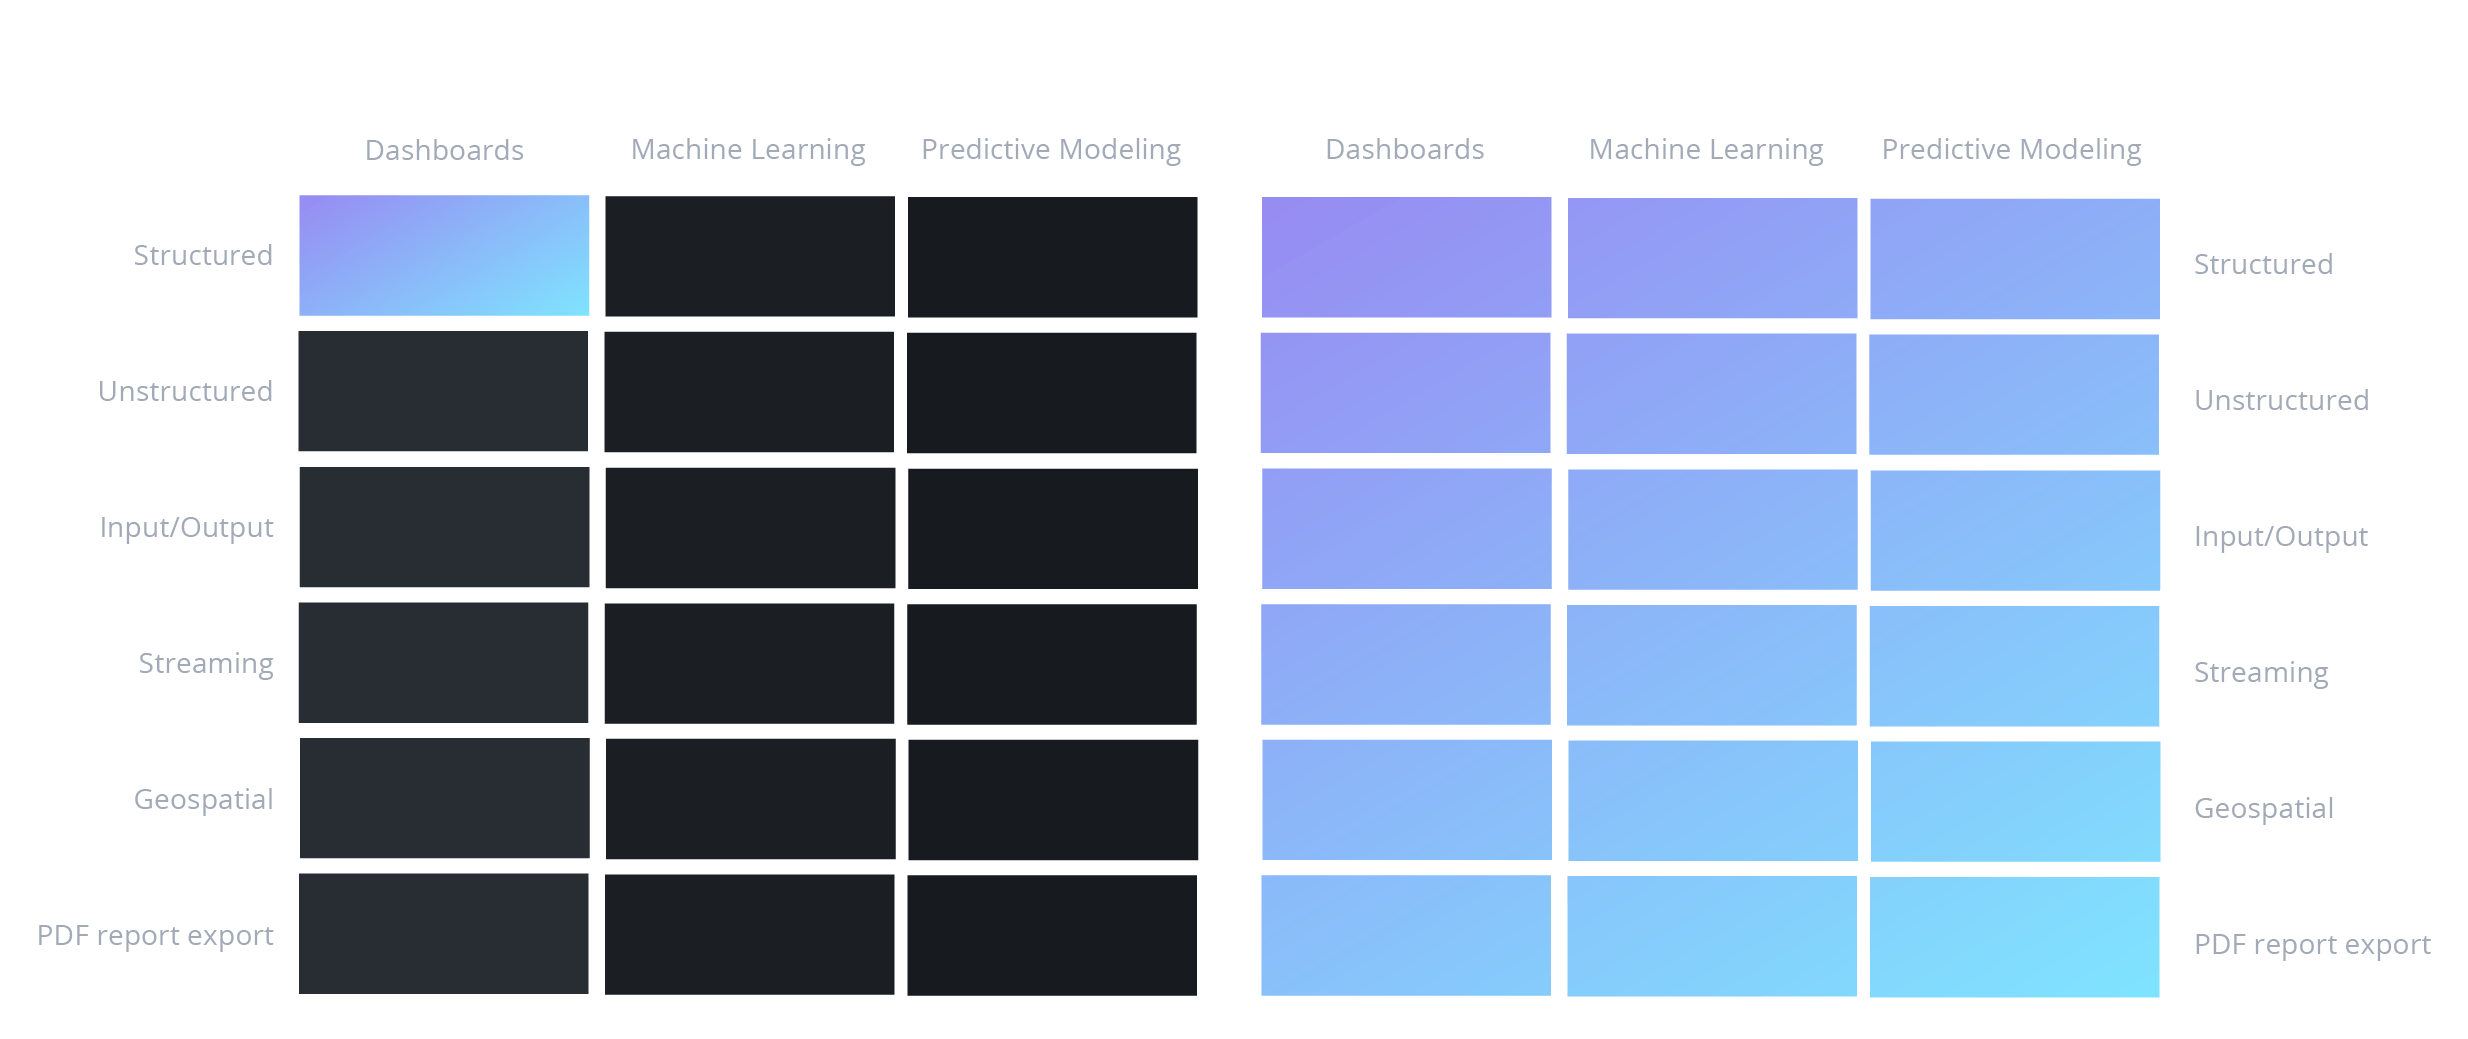 Dash helps data scientists & quants operationalize Python models